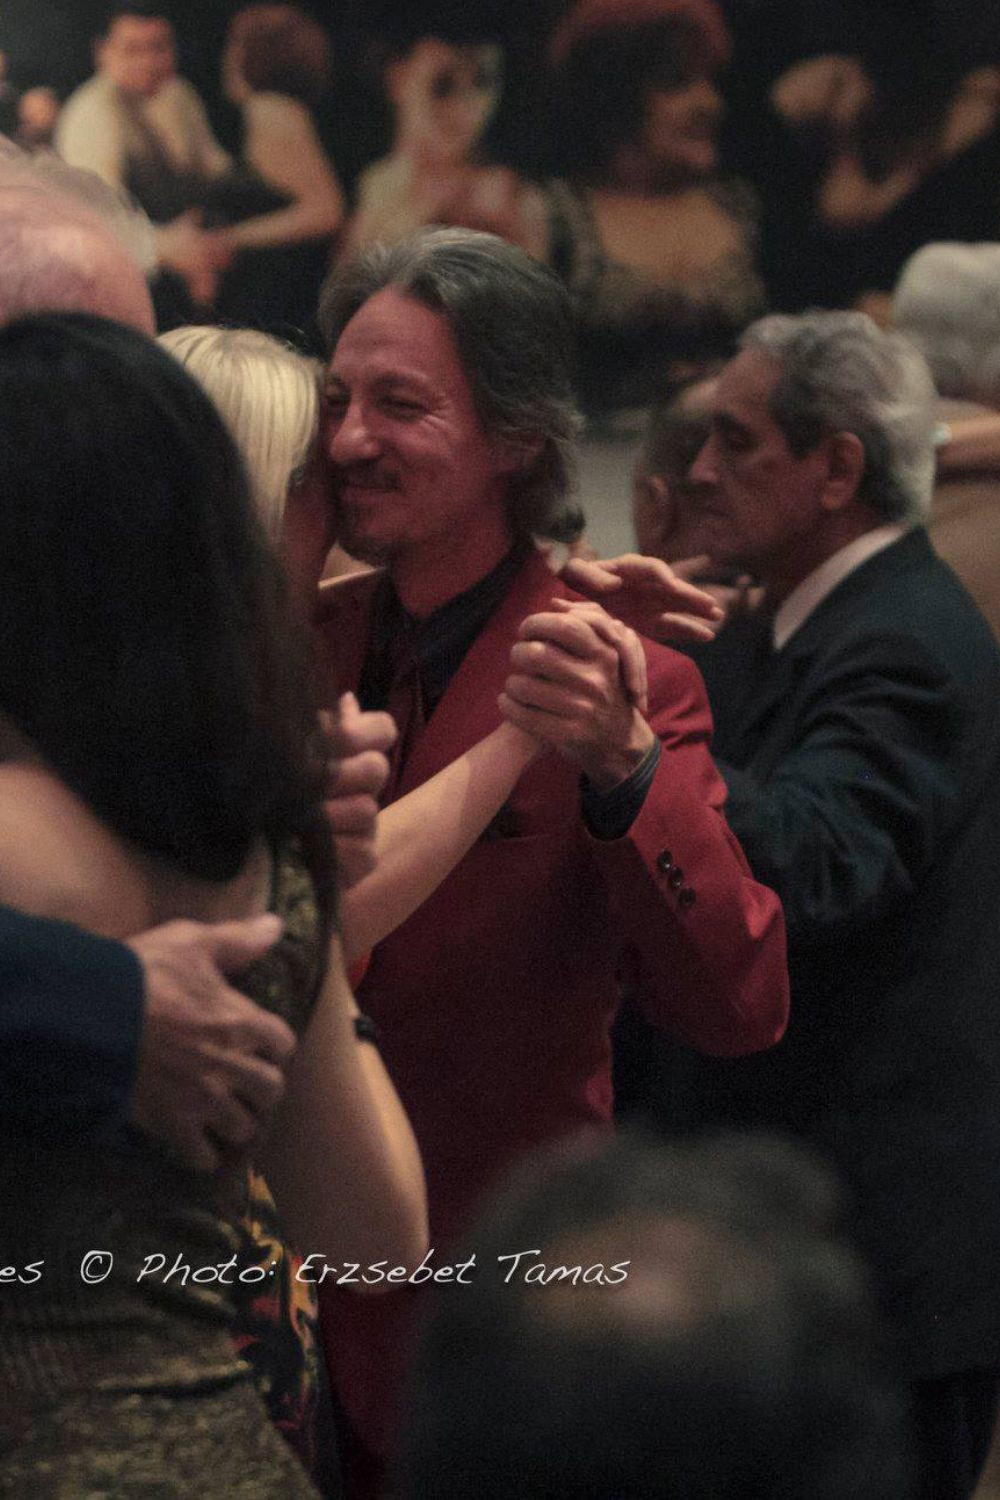 Marcelo Solis in red suit dancing Argentine Tango with a blond lady at a milonga in Buenos Aires with Blas Catrenau dancing in the background.